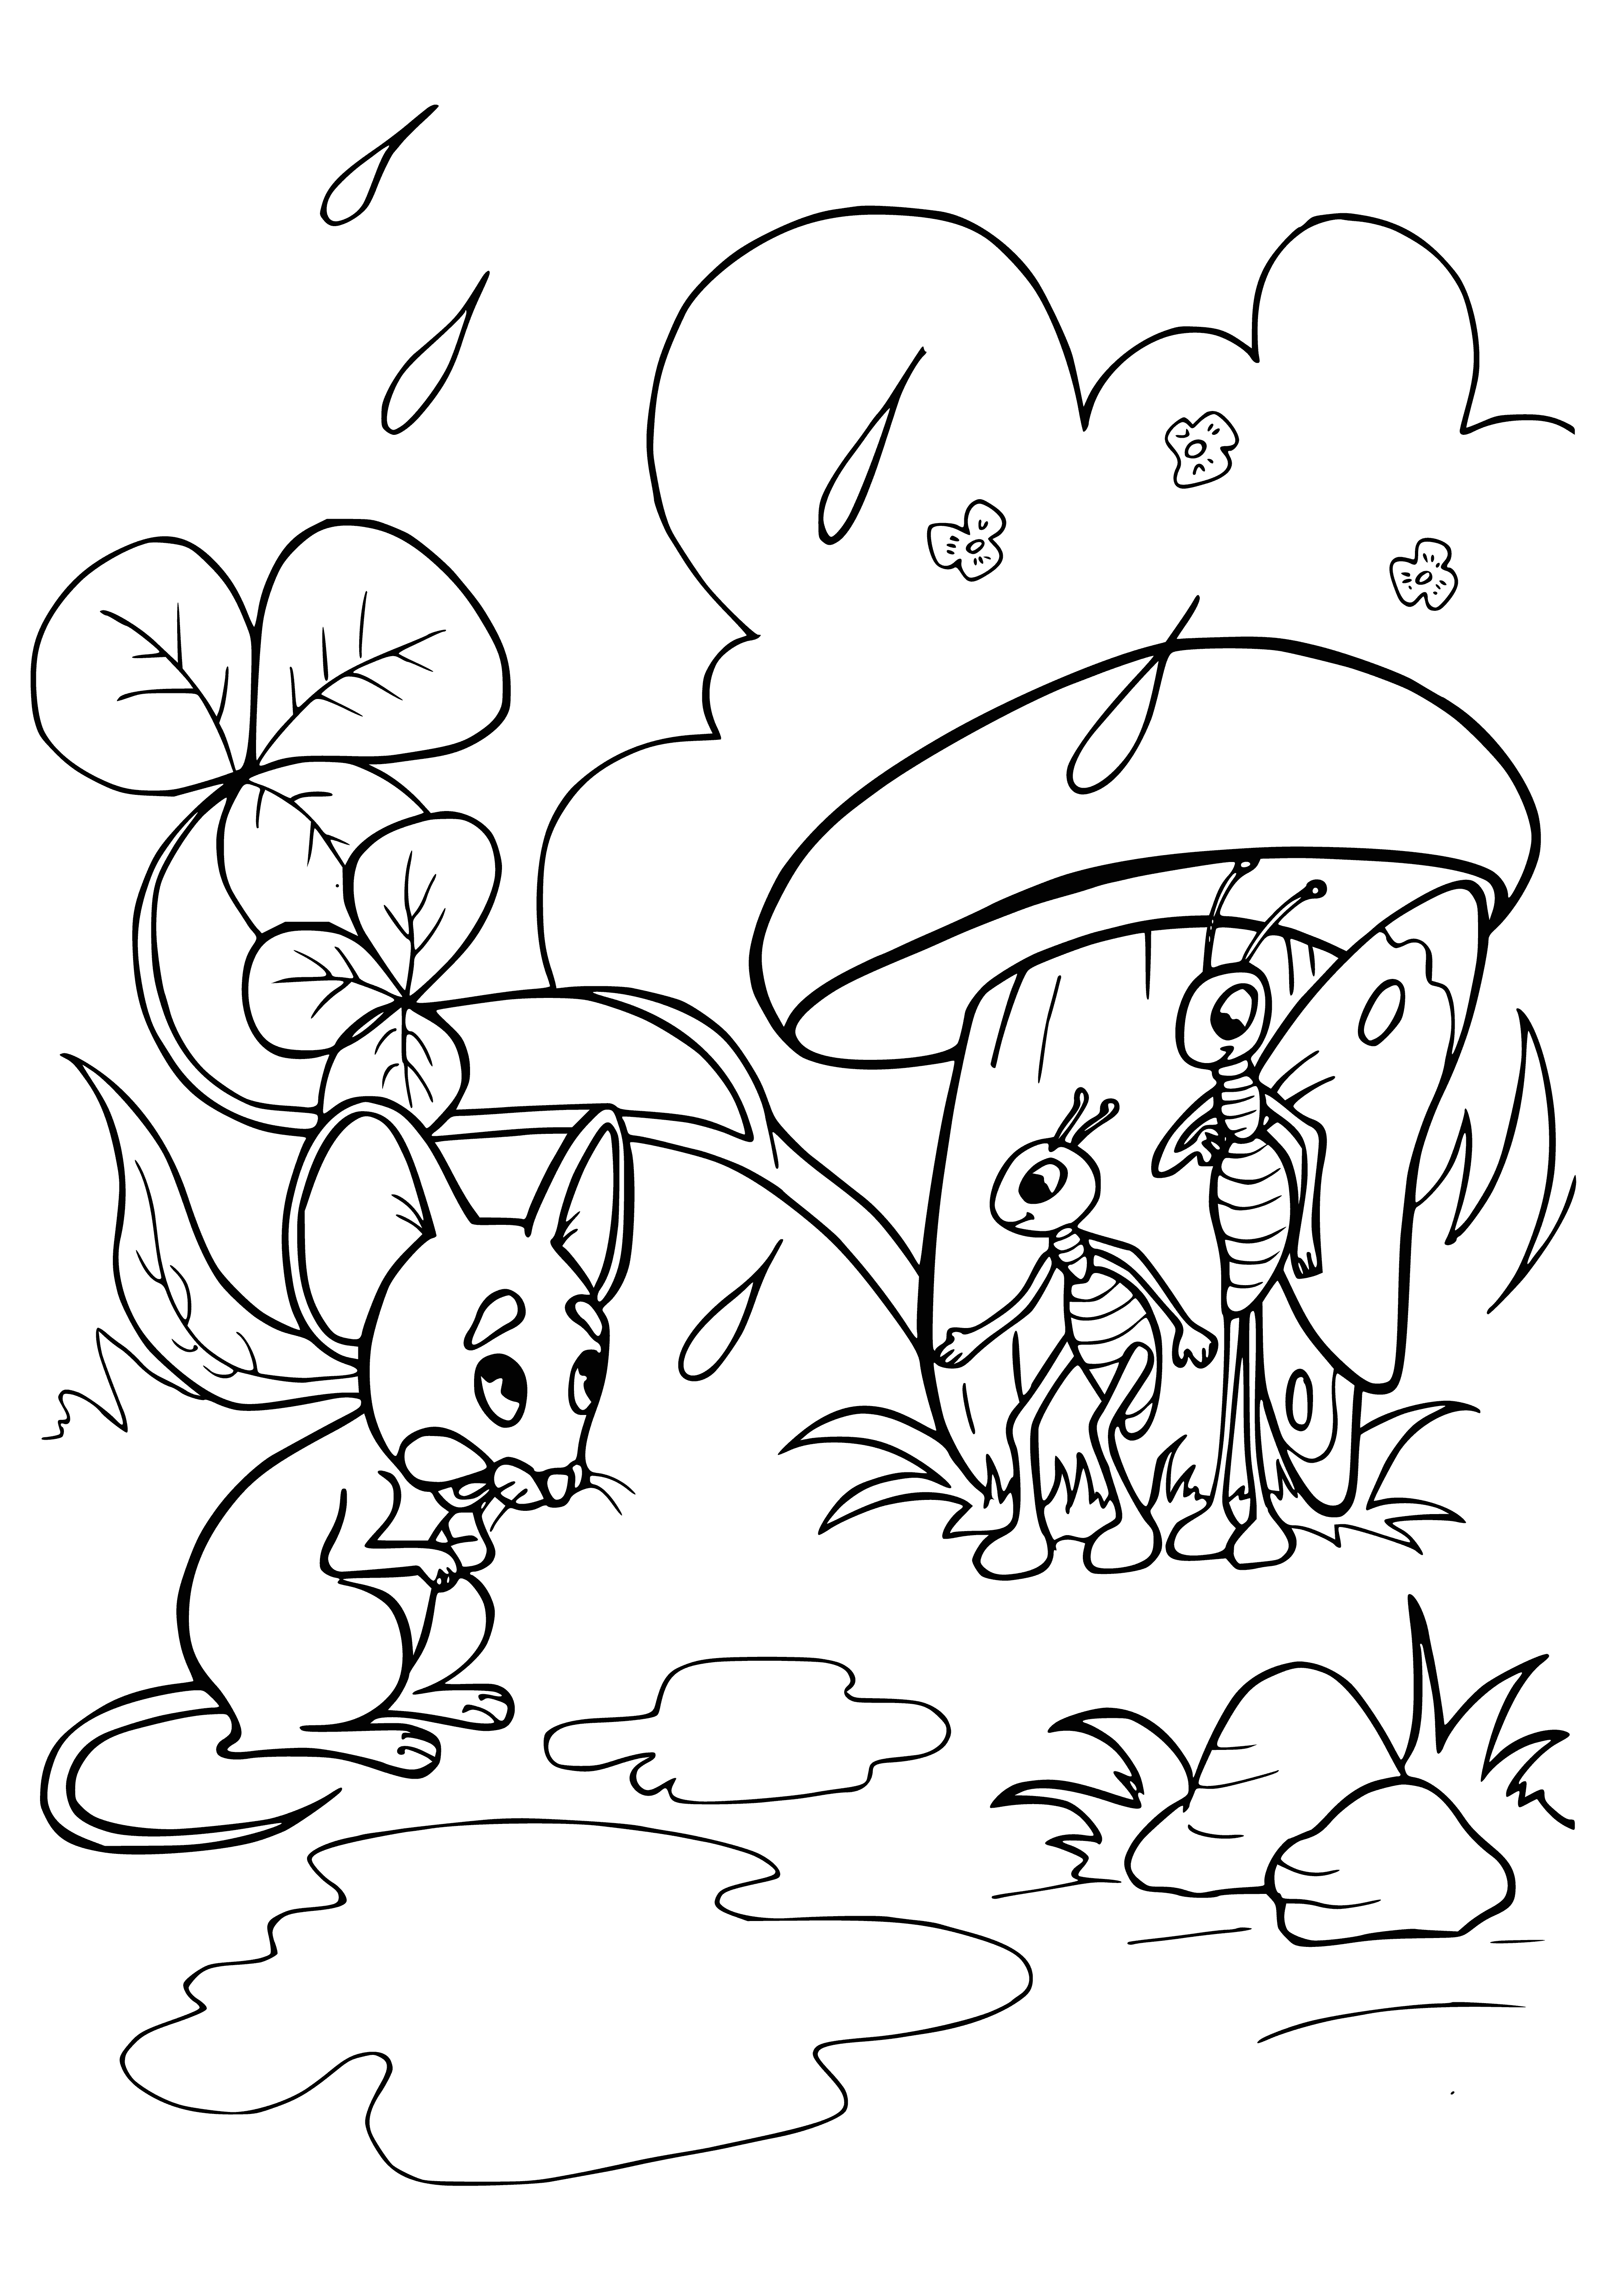 coloring page: A small brown mouse is sniffing a large, spotted red & white mushroom growing from the ground, standing on its hind legs with a long thin tail.